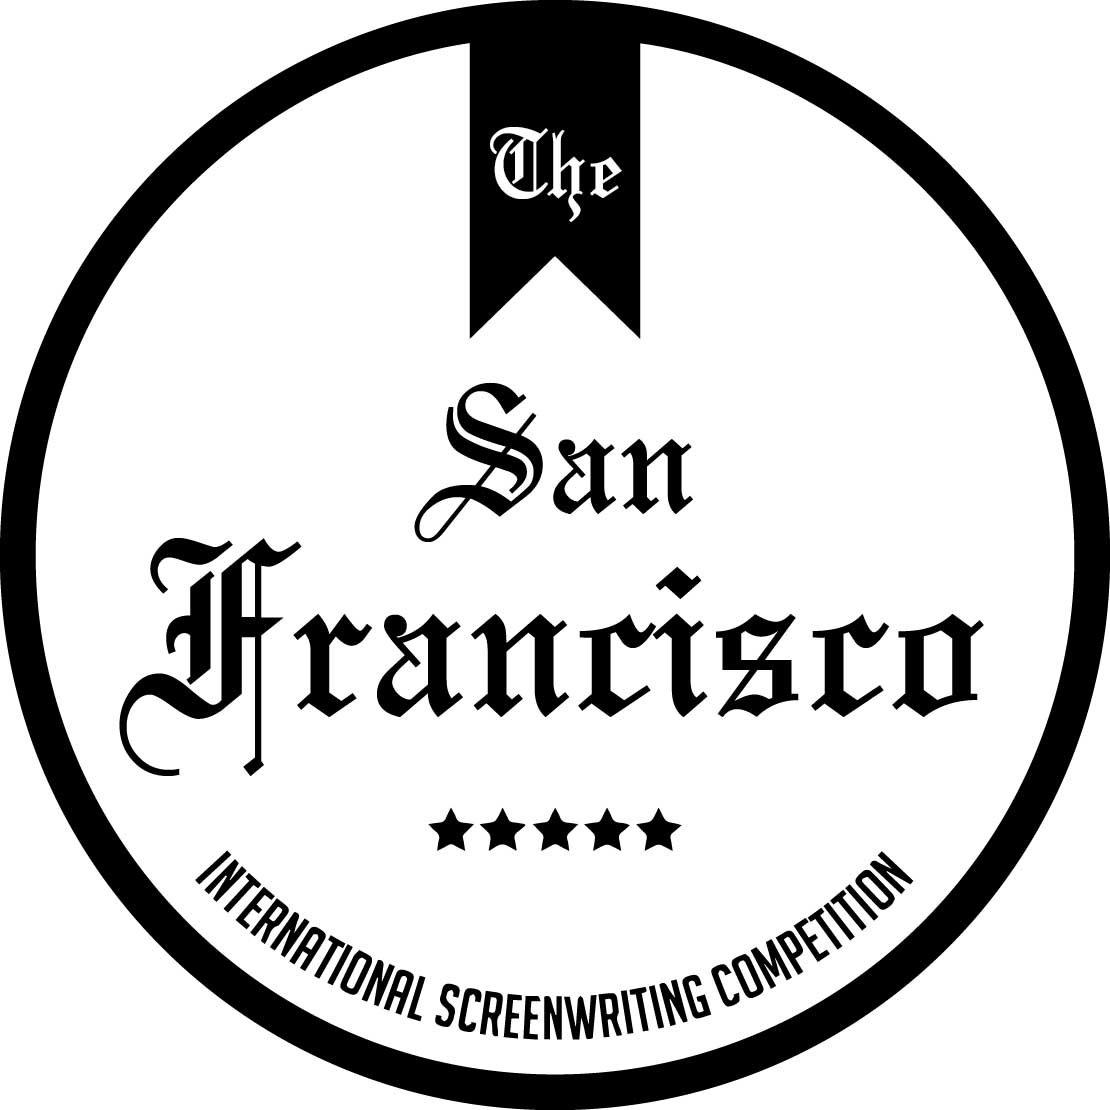 If you're serious about writing an award-winning script, The San Francisco International Screenwriting Competition is the perfect competition for you.